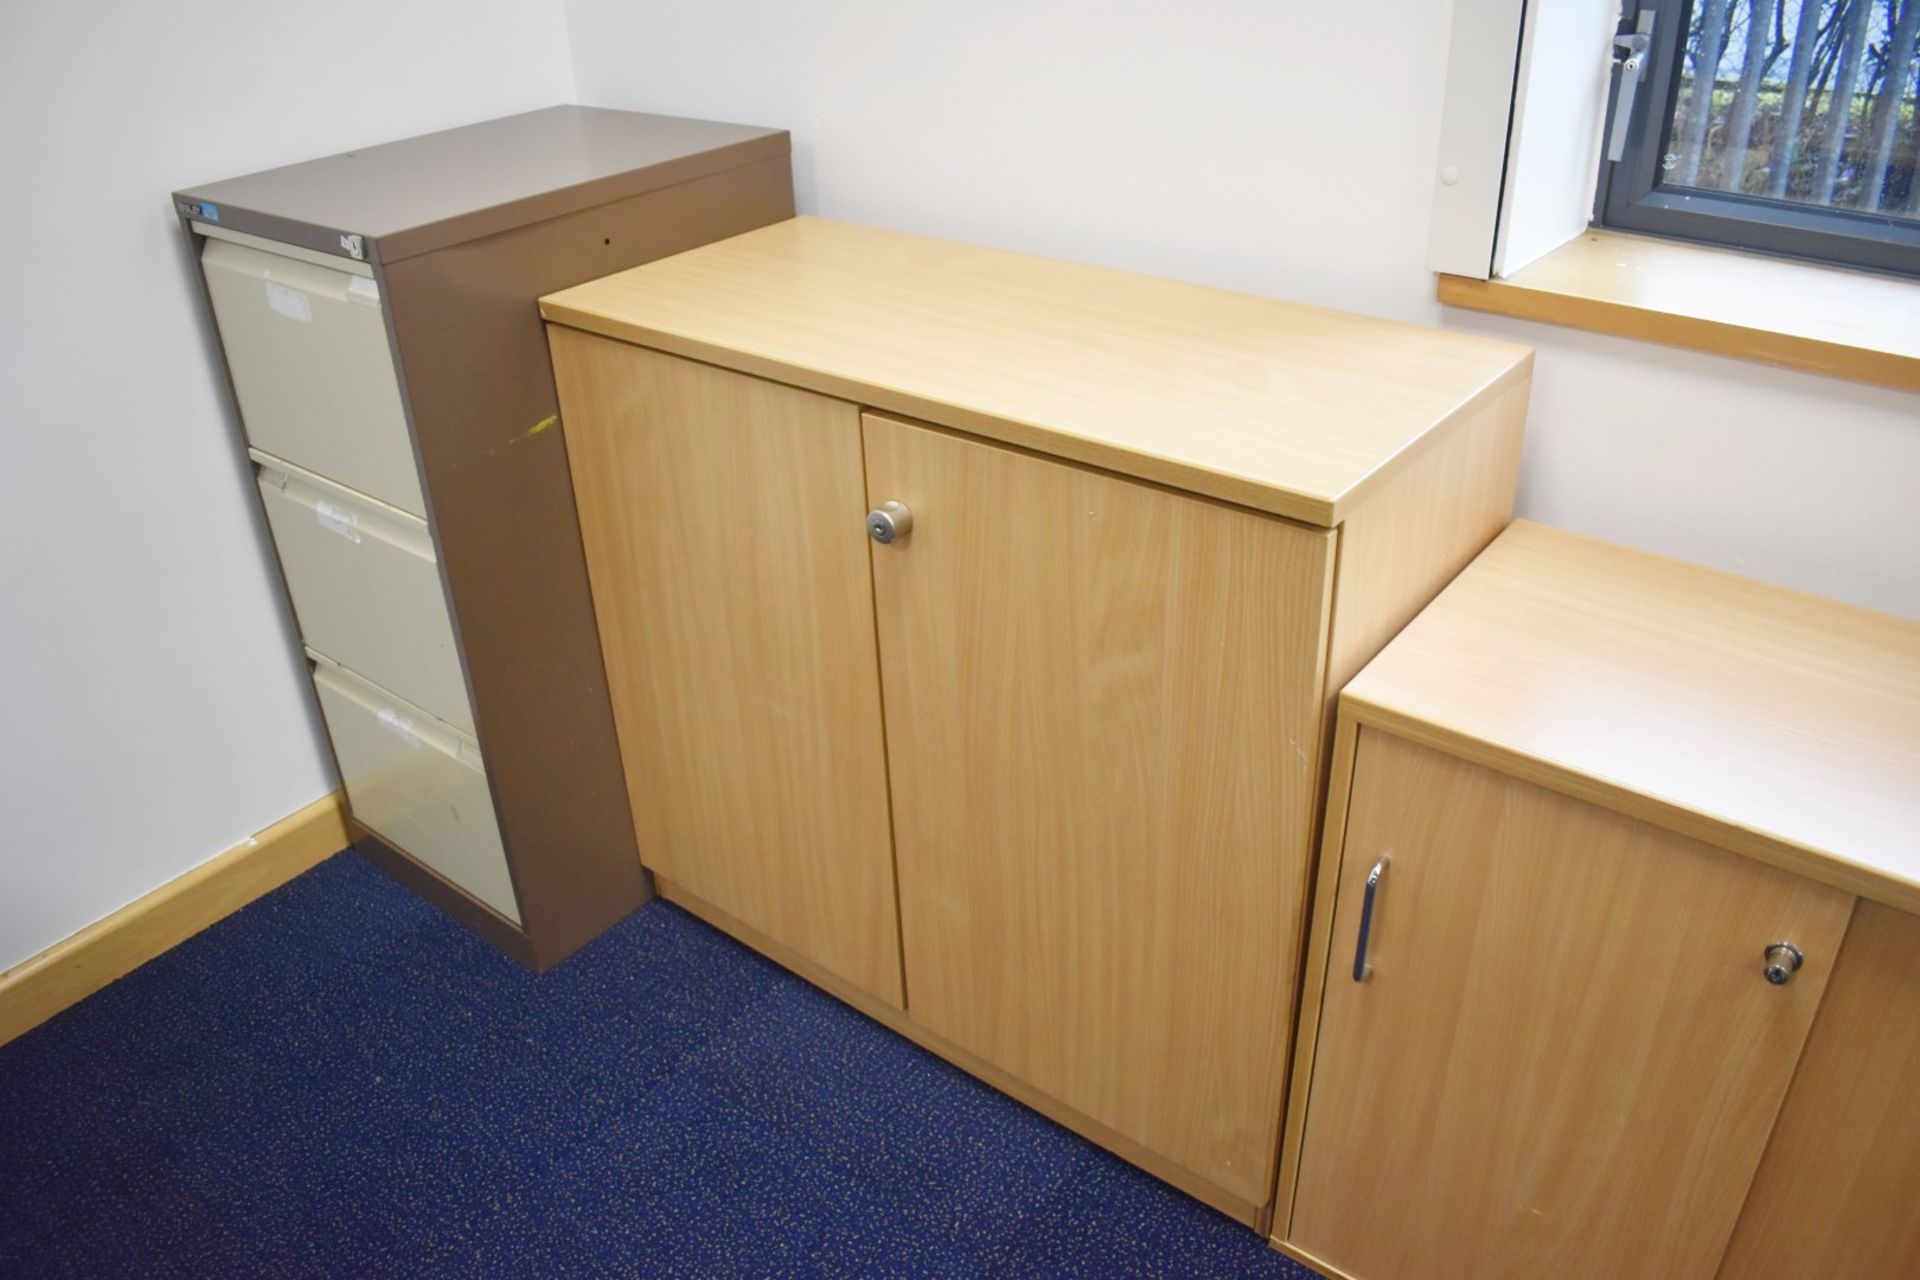 5 x Assorted Office Cabinets - Ref: FF177 D - CL544 - Location: Leeds, LS14Collections:This item - Image 3 of 4